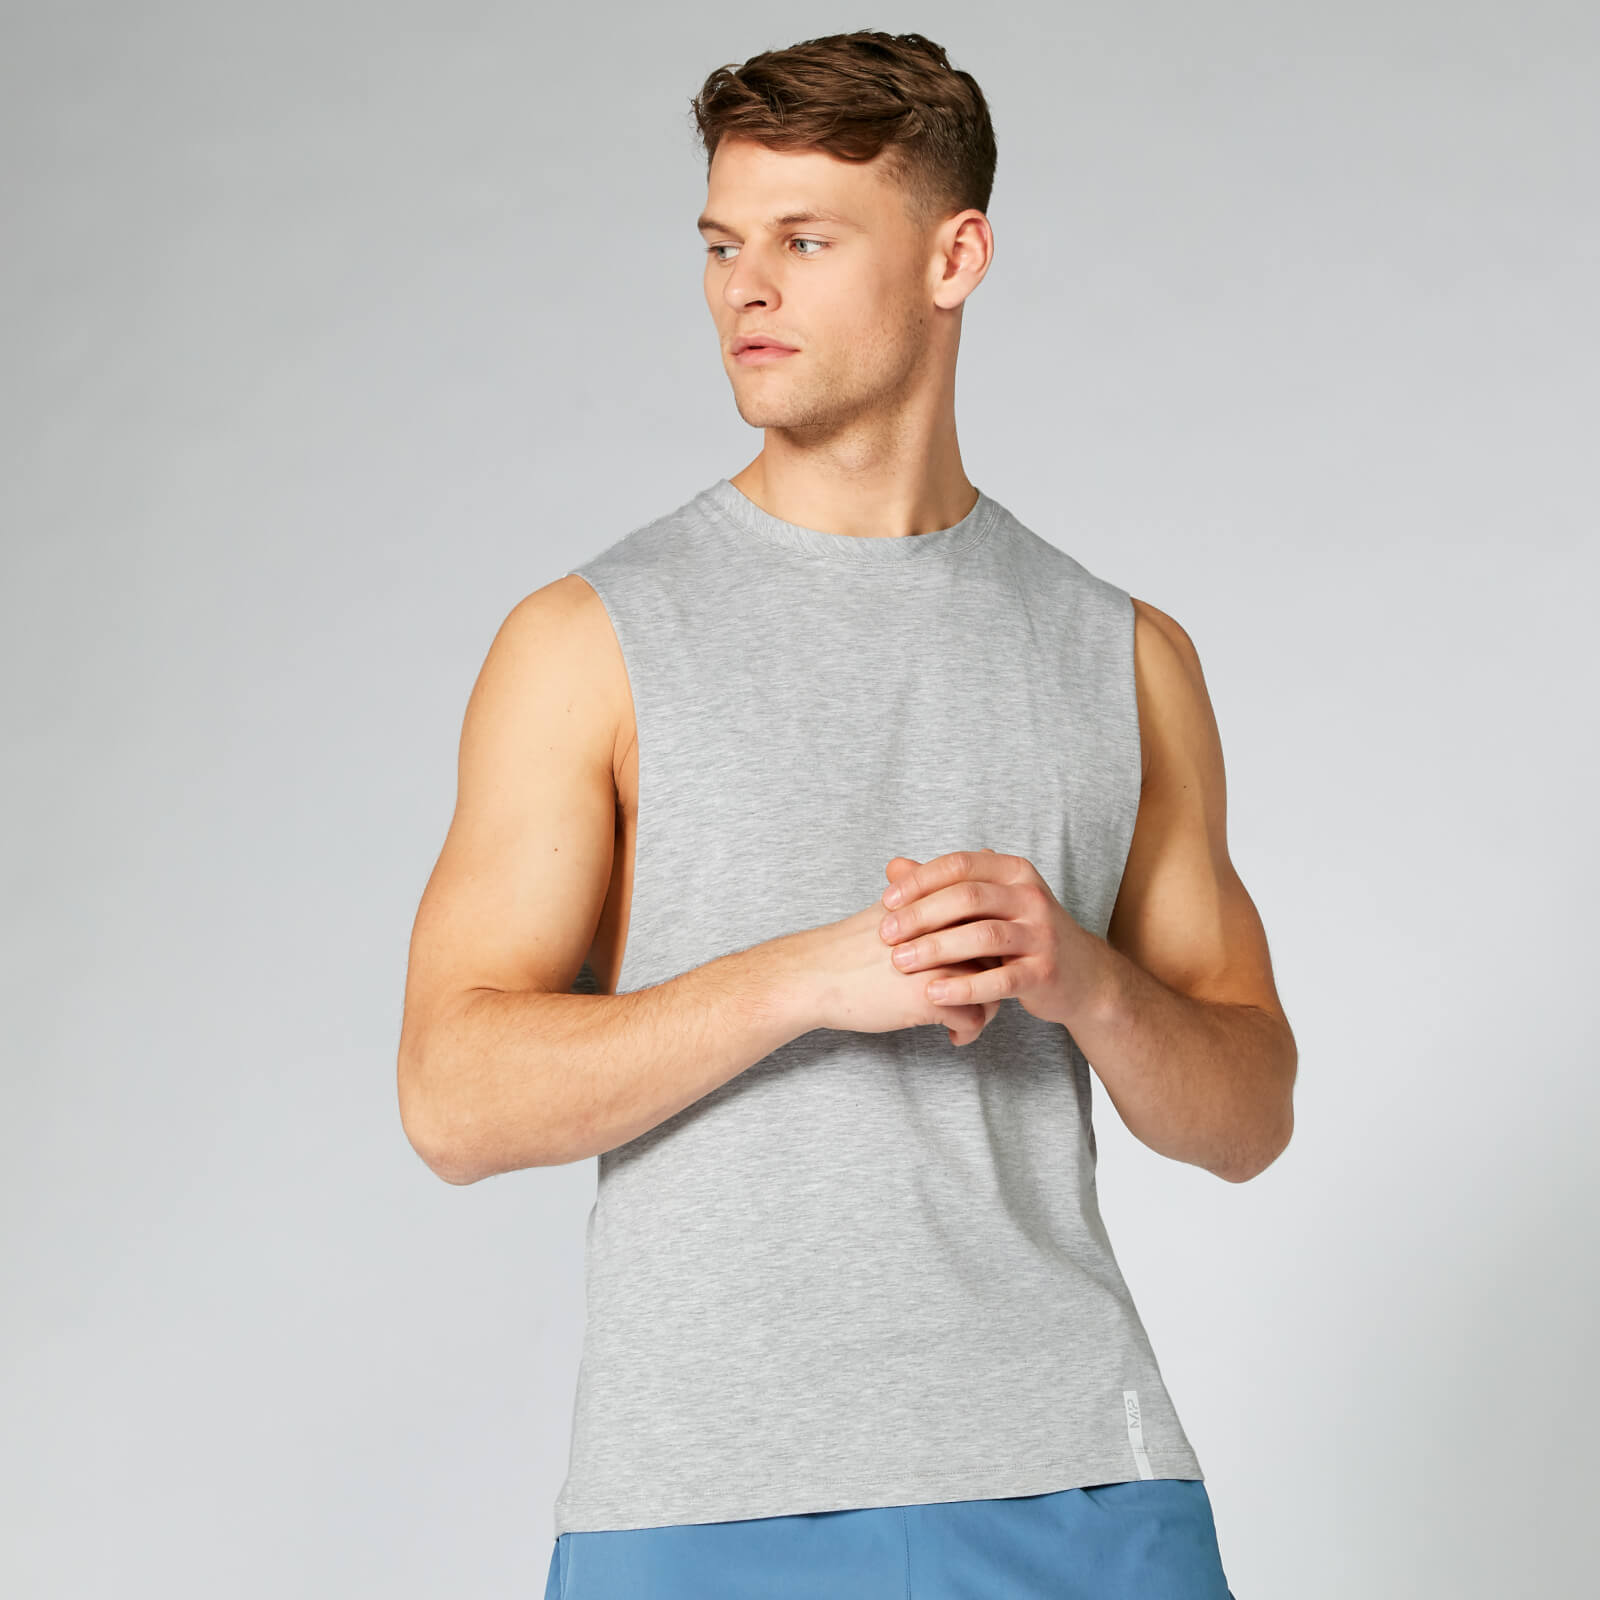 Myprotein Luxe Classic Drop Armhole Tank Top - Silver - XS